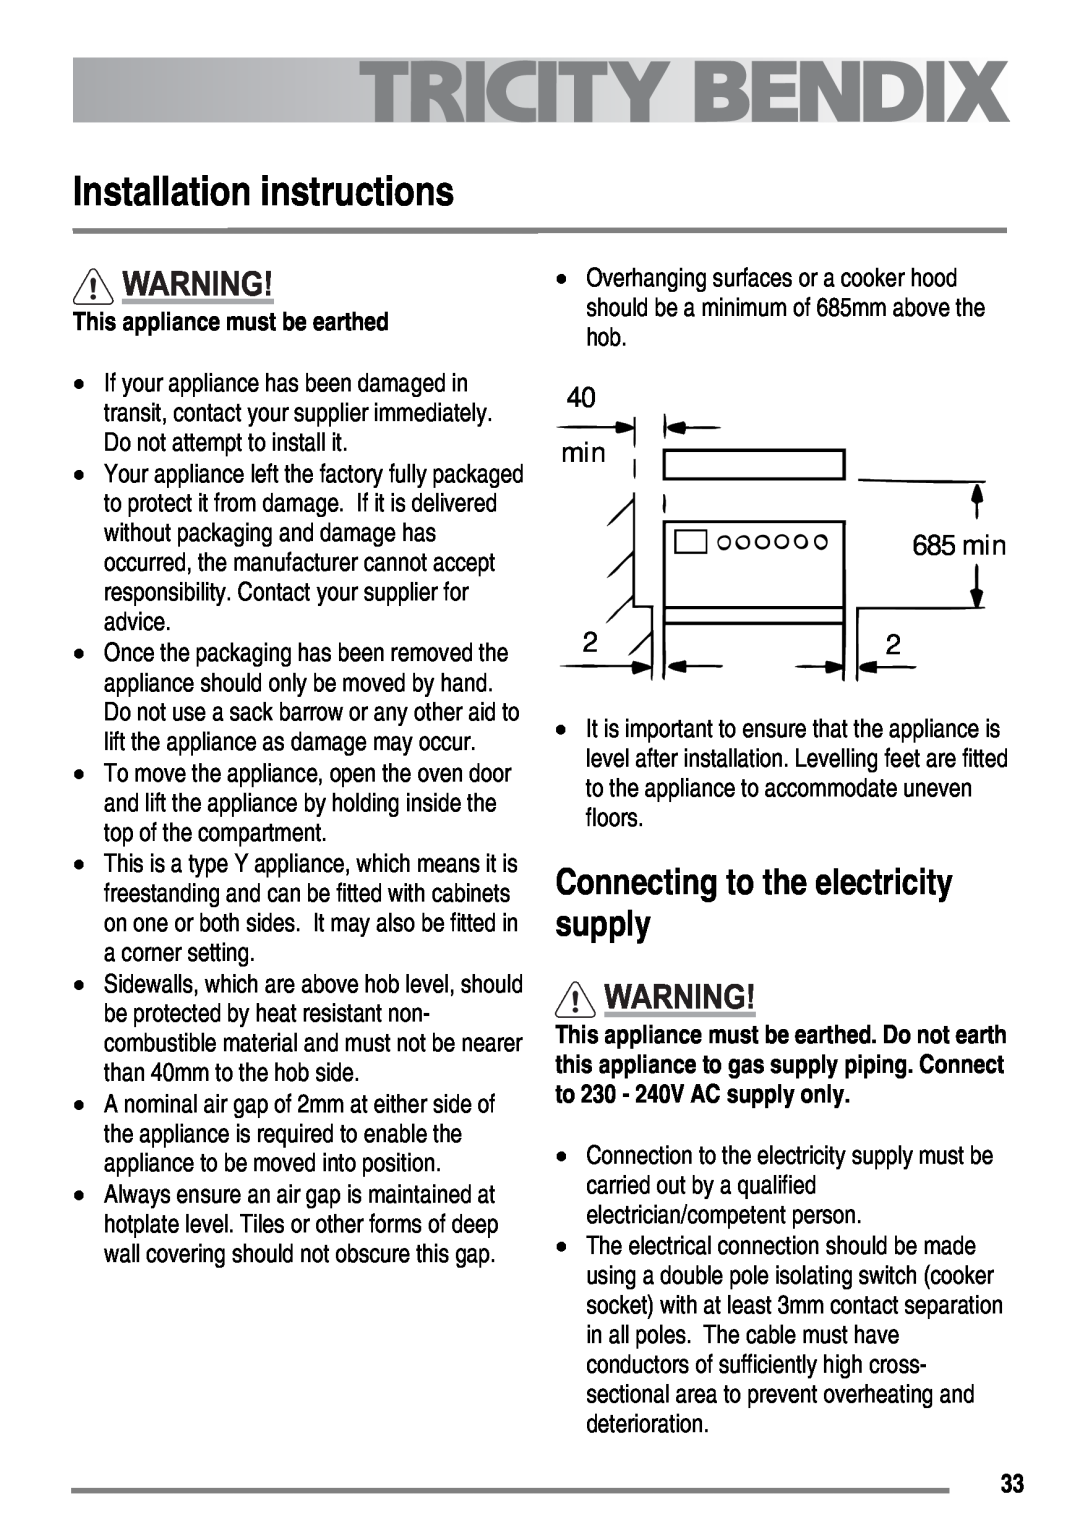 Tricity Bendix SE558 Installation instructions, Connecting to the electricity supply, This appliance must be earthed 